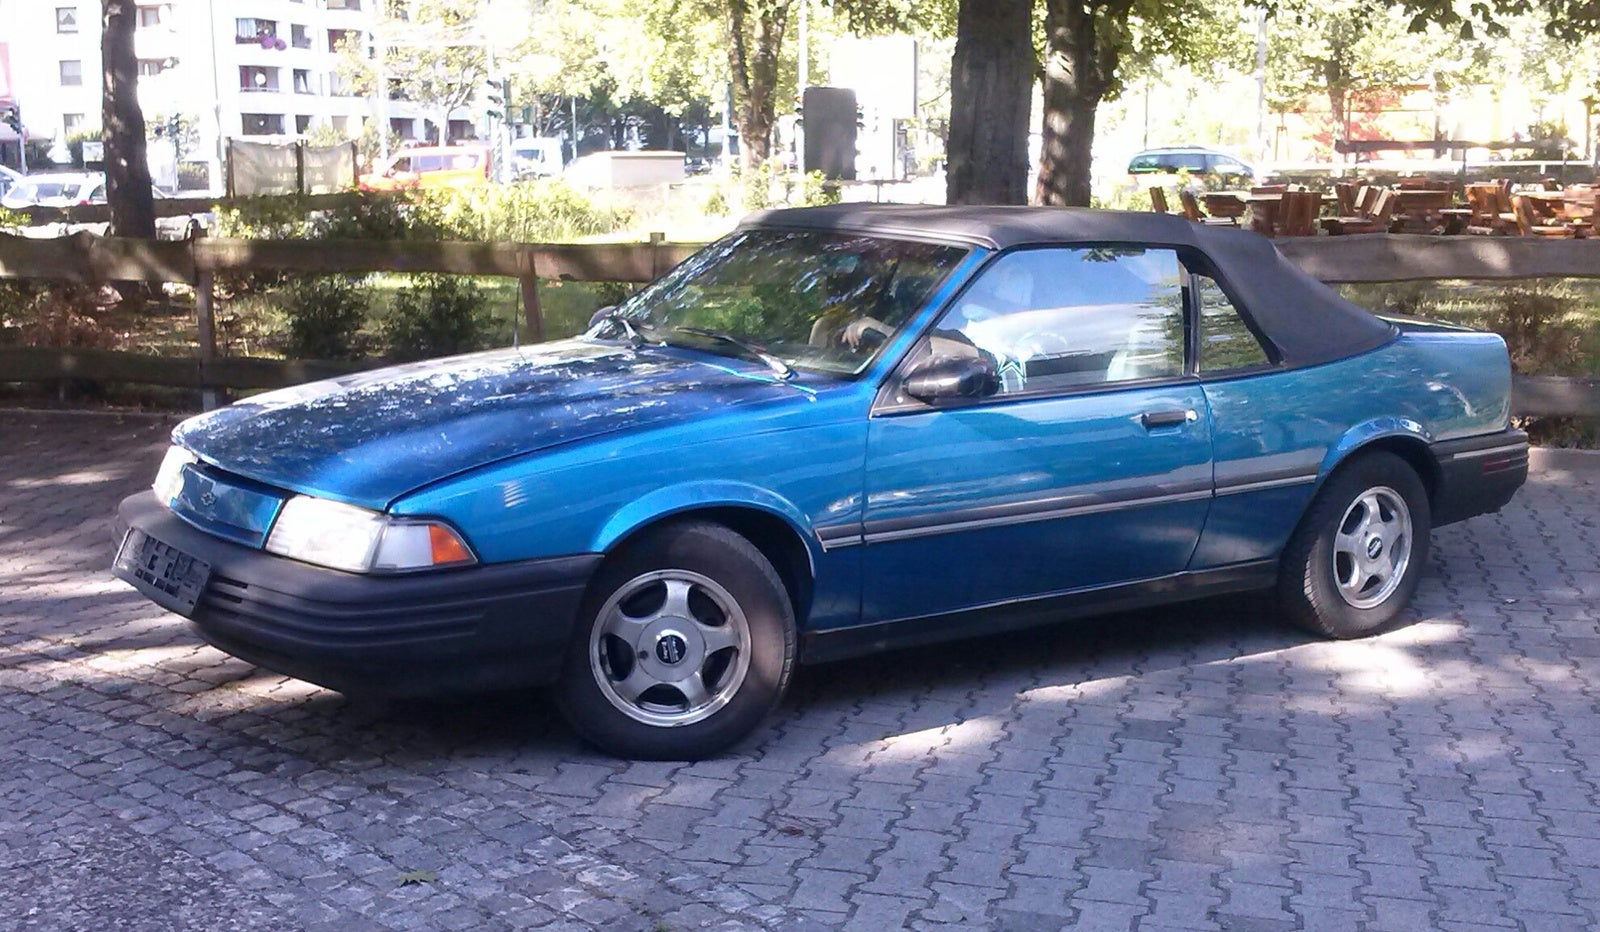 Chevrolet Cavalier Questions How Can I Find The Driver